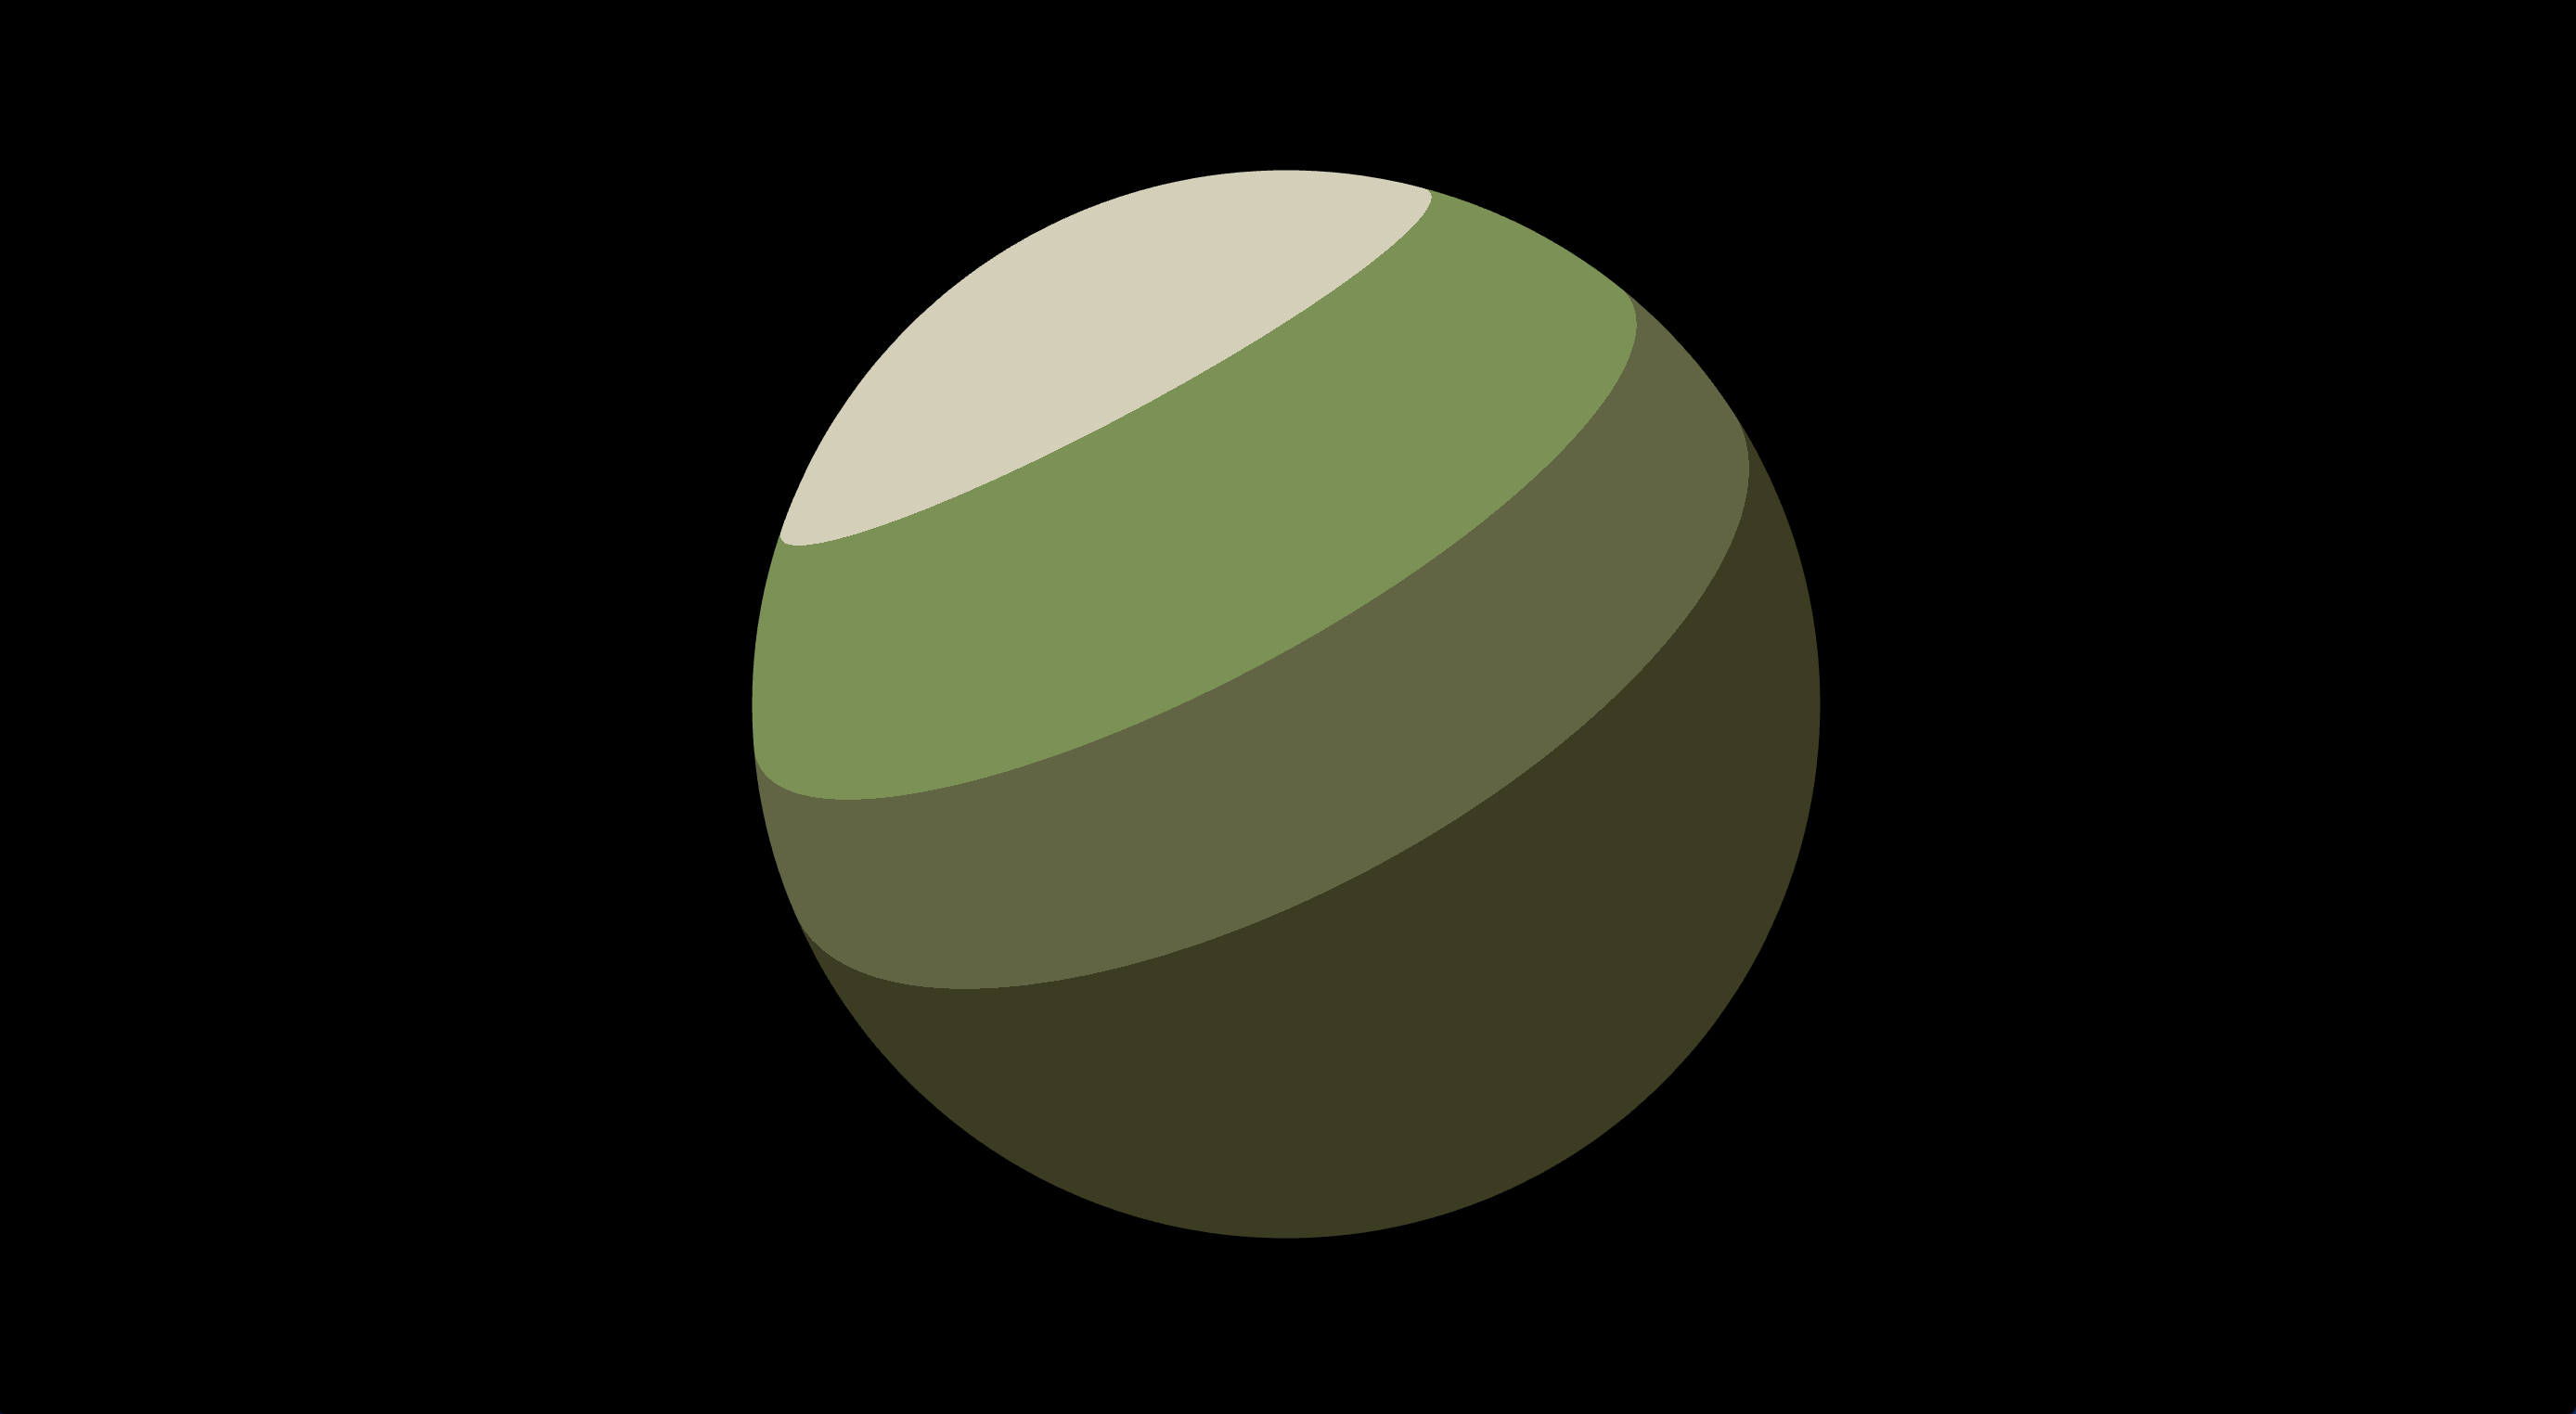 Sphere colored with toon shading